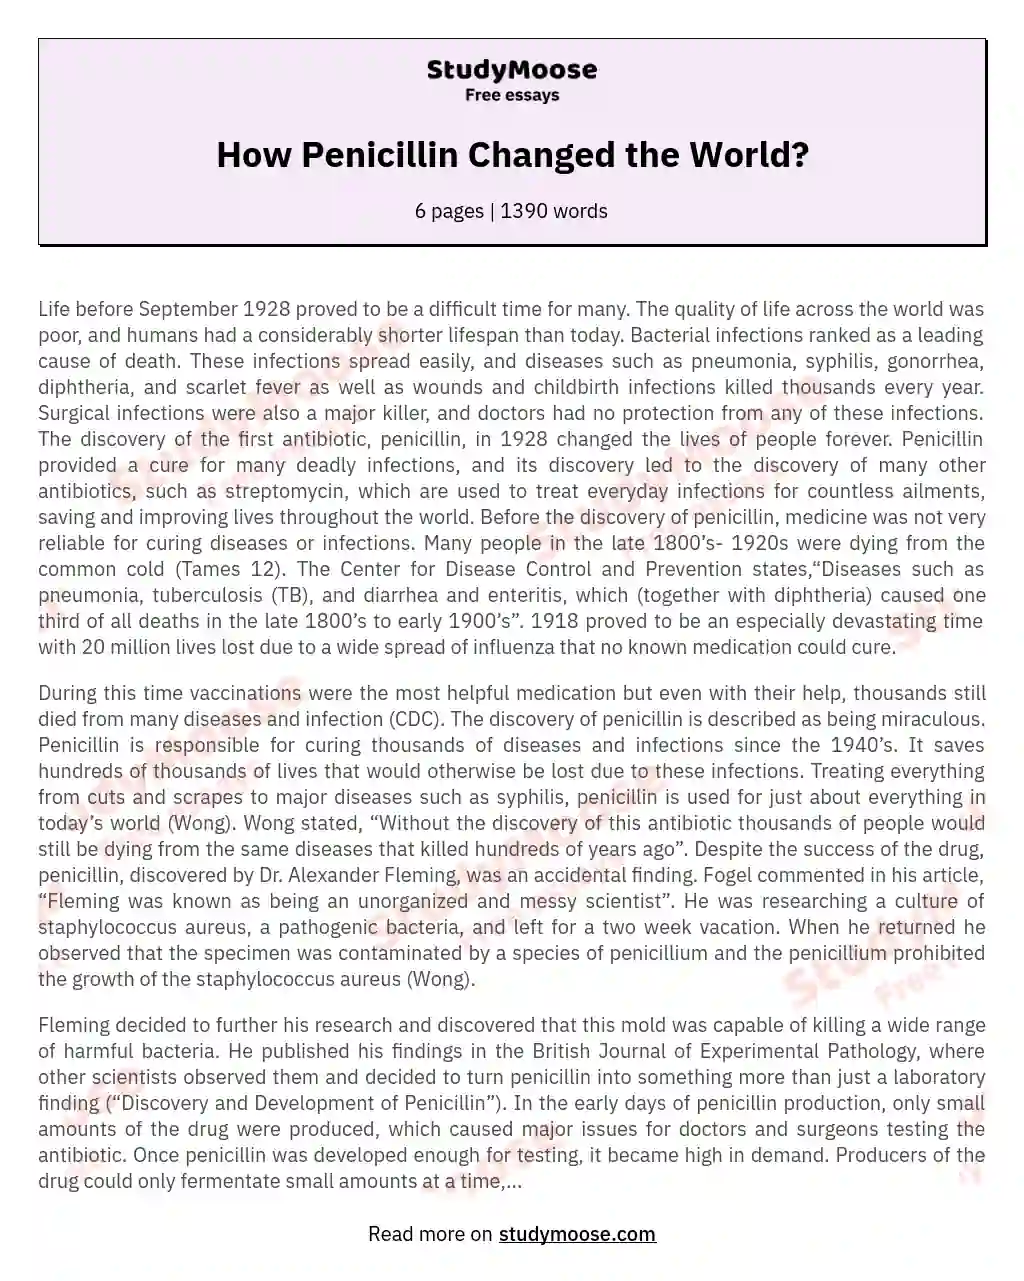 How Penicillin Changed the World? essay